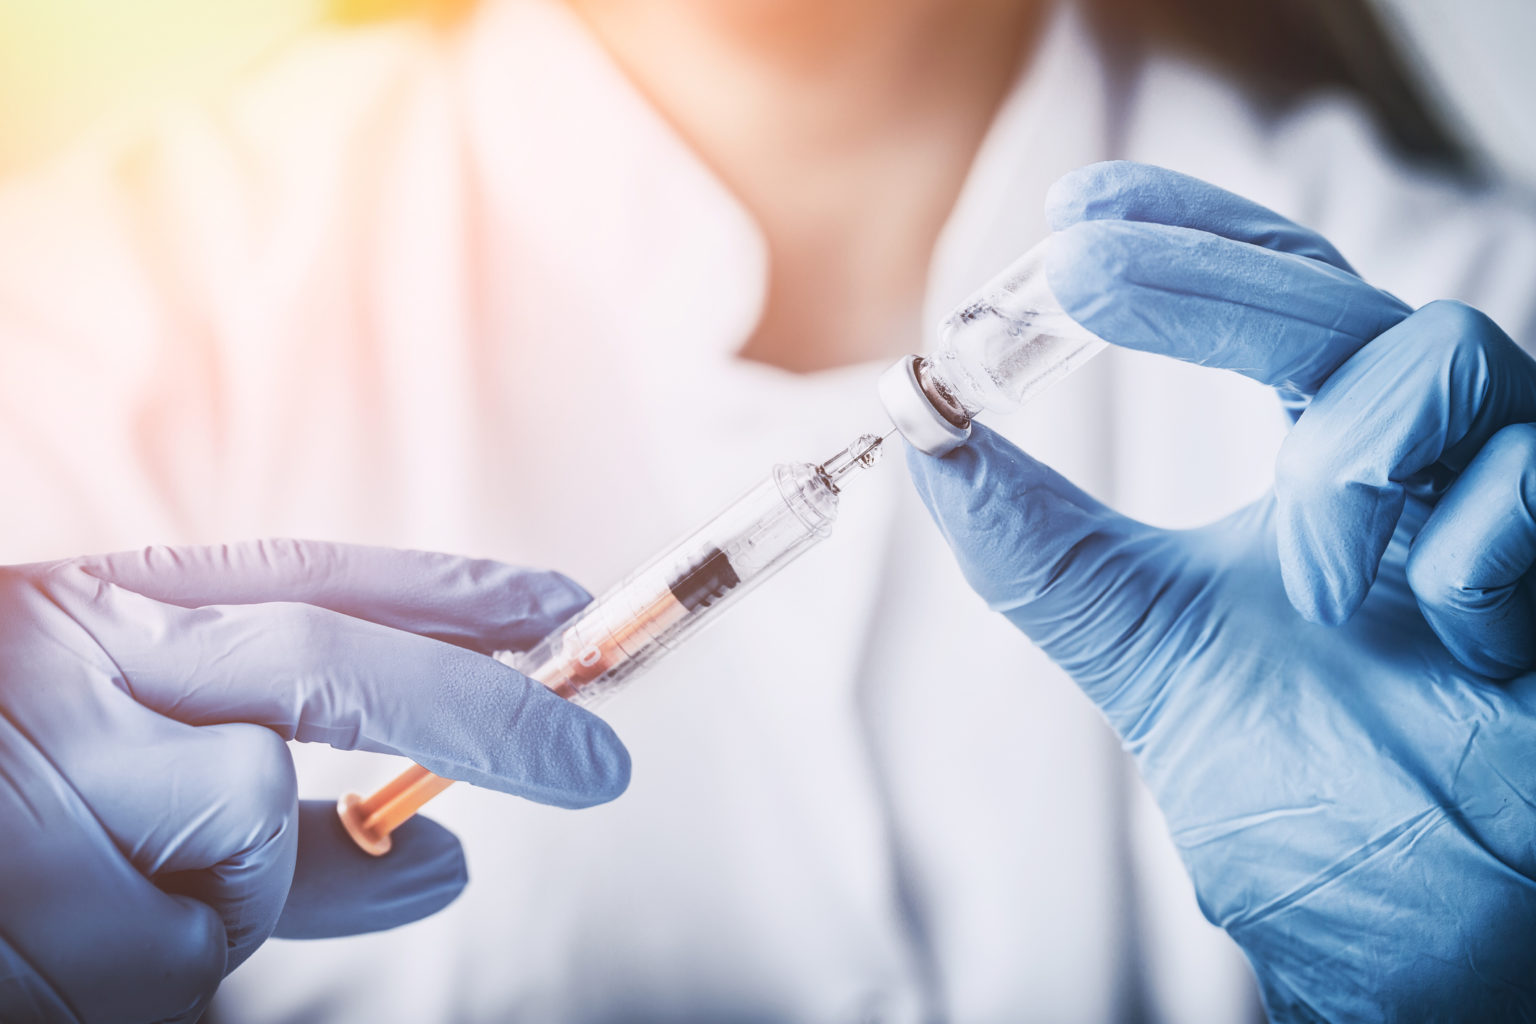 Novavax vaccine is highly protective against COVID-19 in Phase 3 results